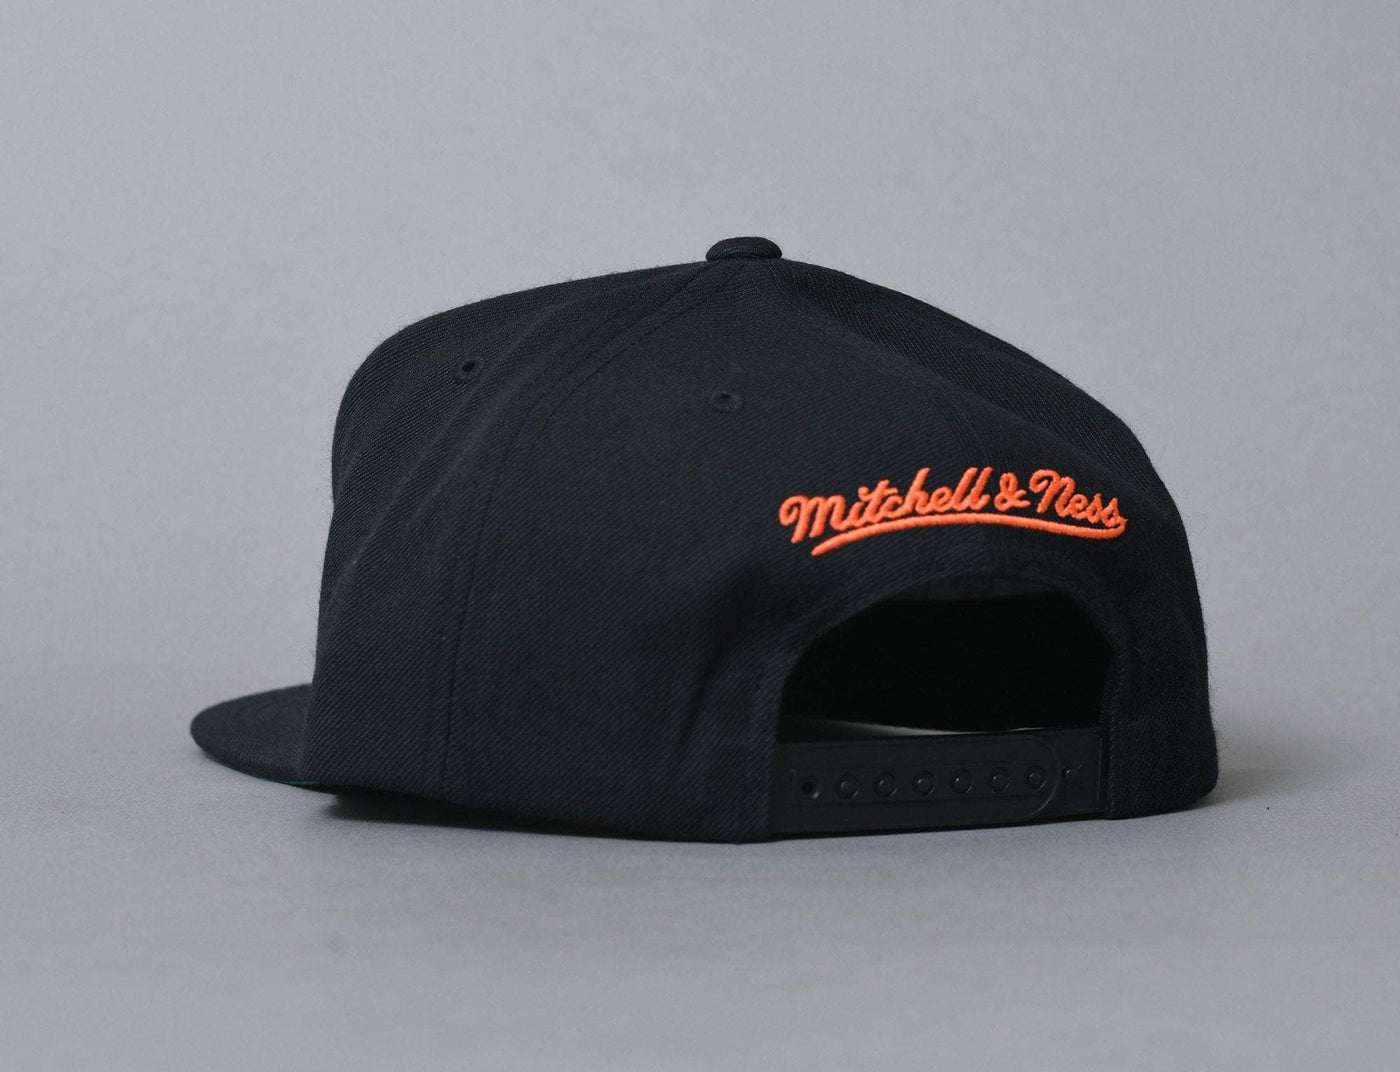 Cap Snapback Mitchell & Ness Wool Solid New York Knicks Black Mitchell & Ness Snapback Cap / Black / One Size